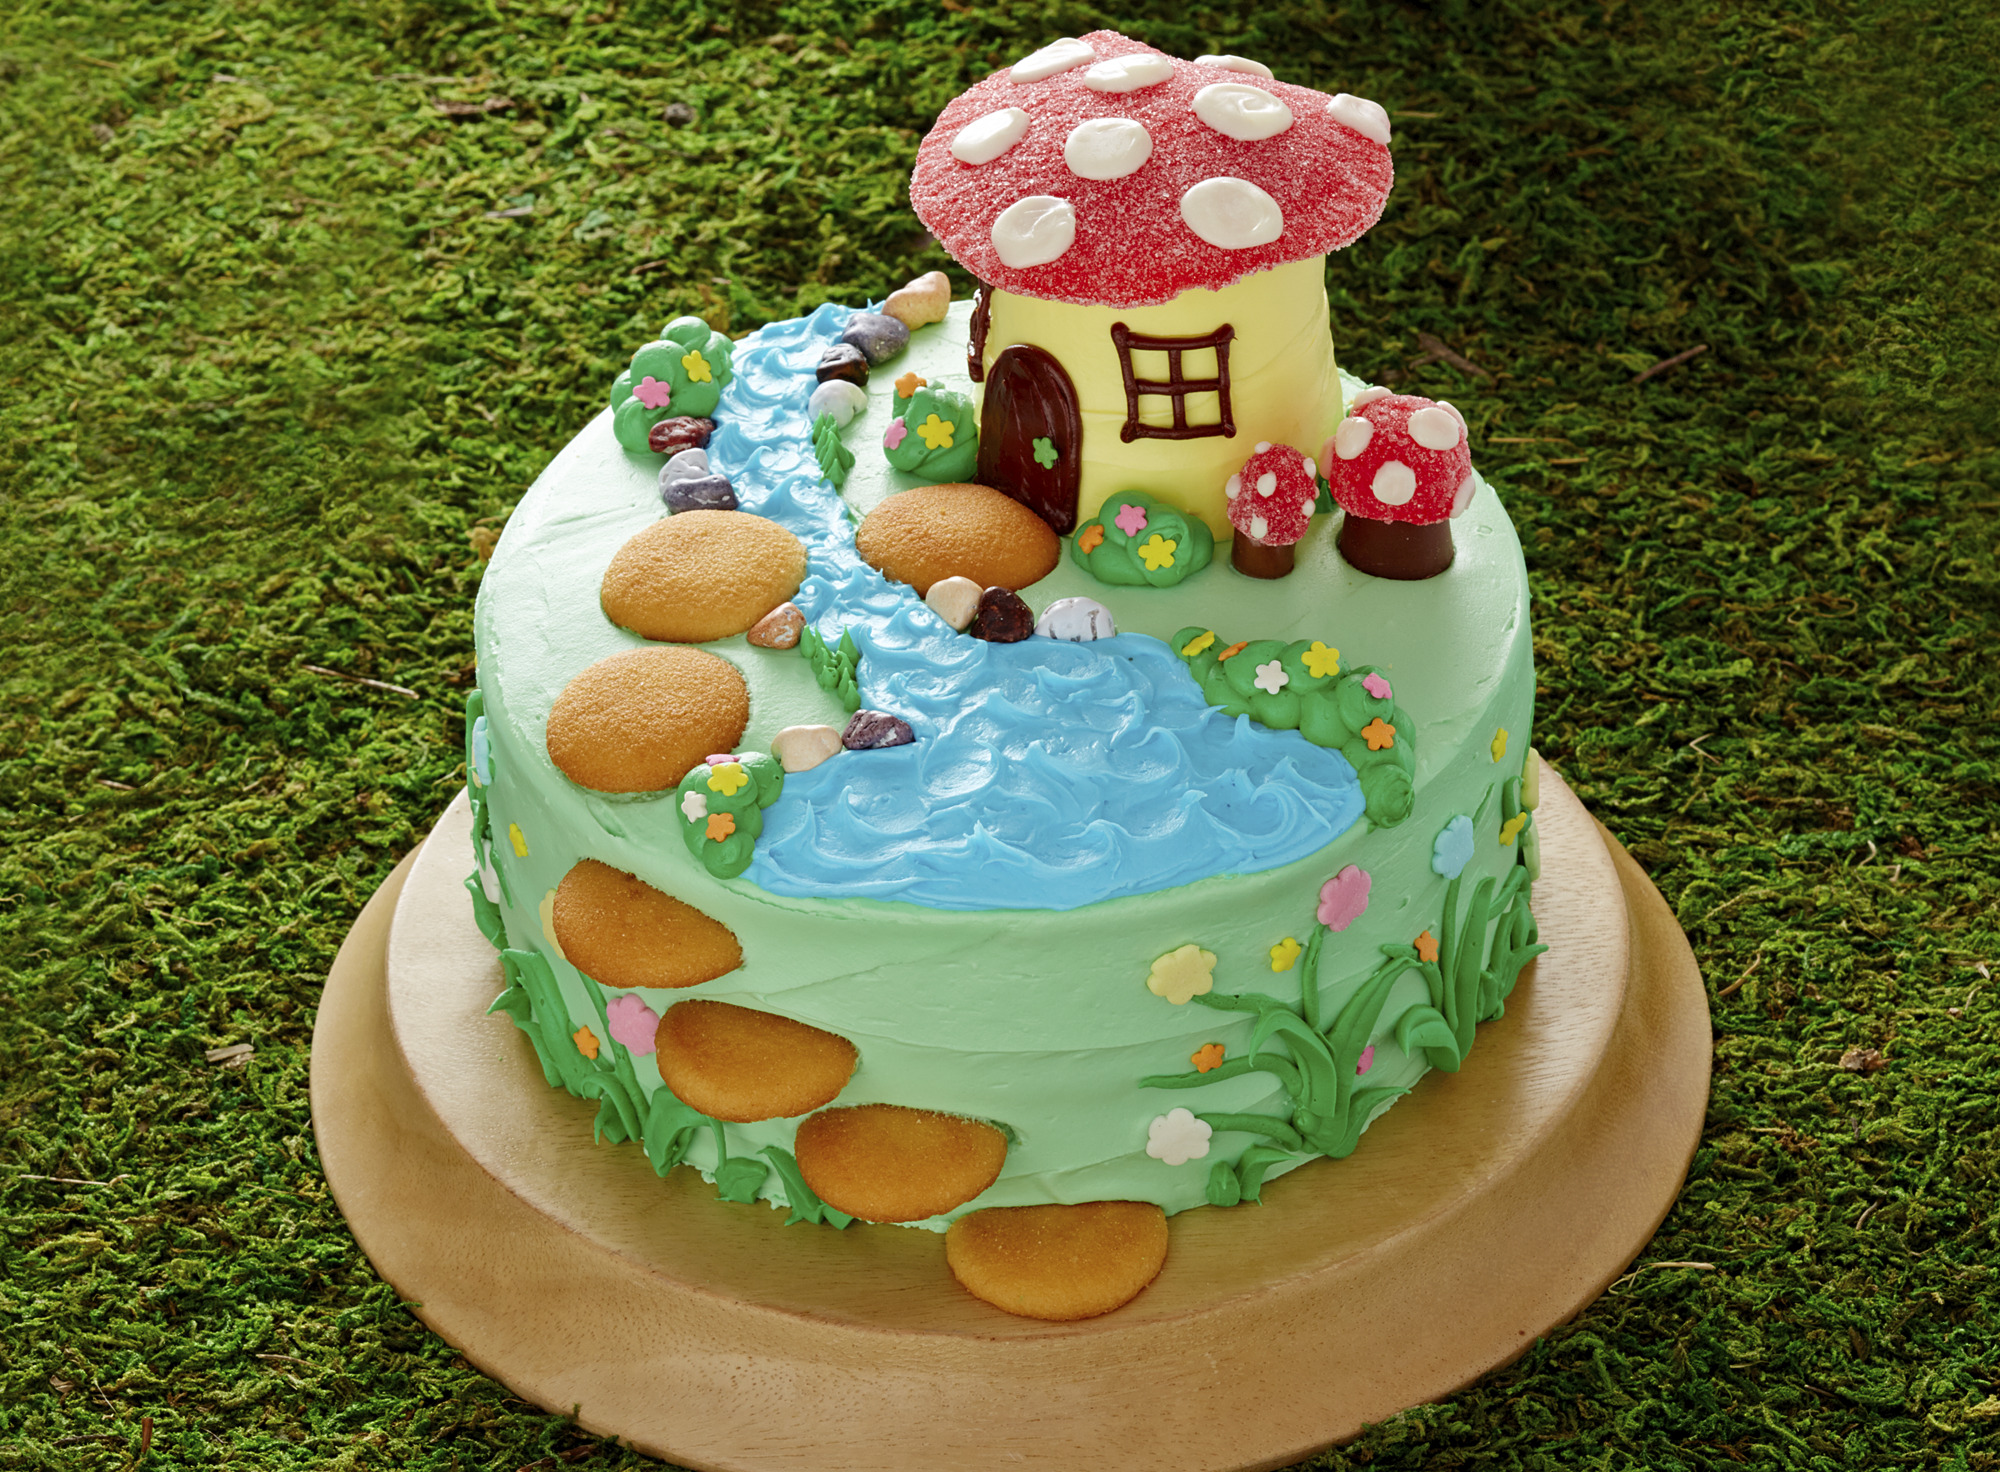 DISNEY Fairy Cake with Tinkerbell, Rosetta and SilverMist | Flickr